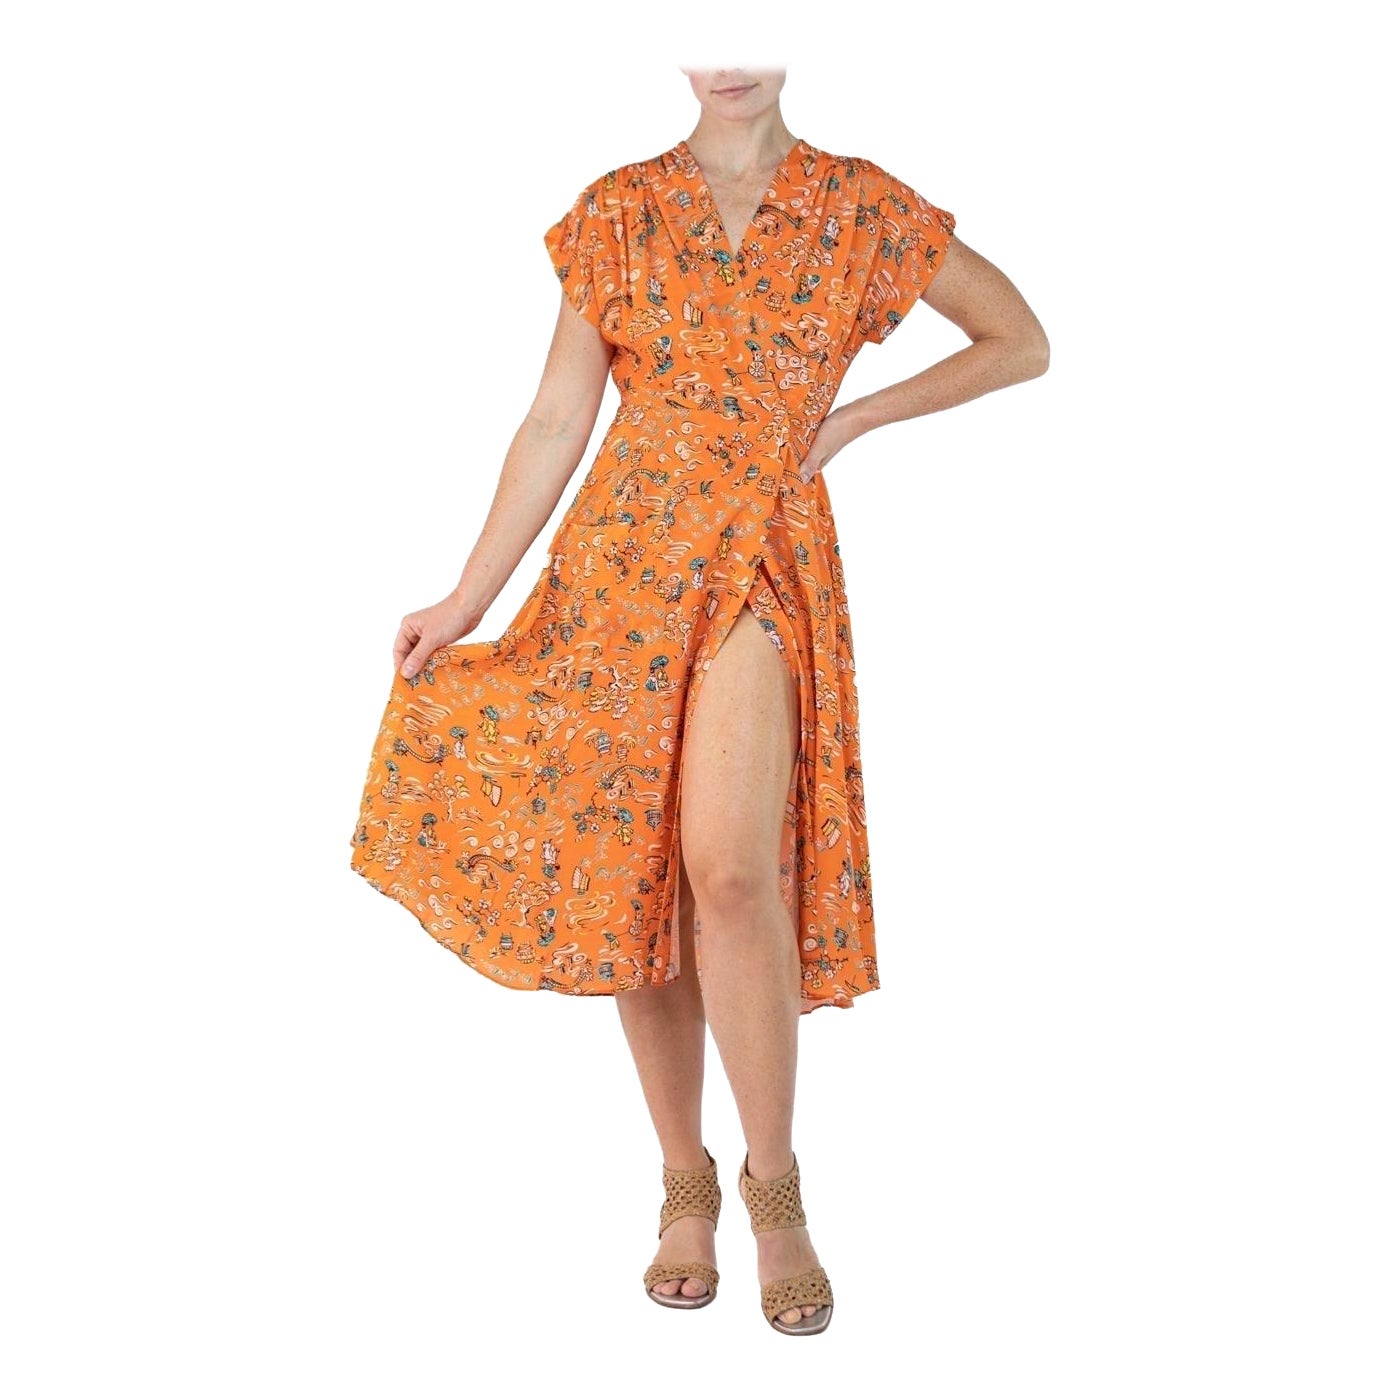 Morphew Collection Orange Cherry Blossom Novelty Print Cold Rayon Bias Dress Ma For Sale